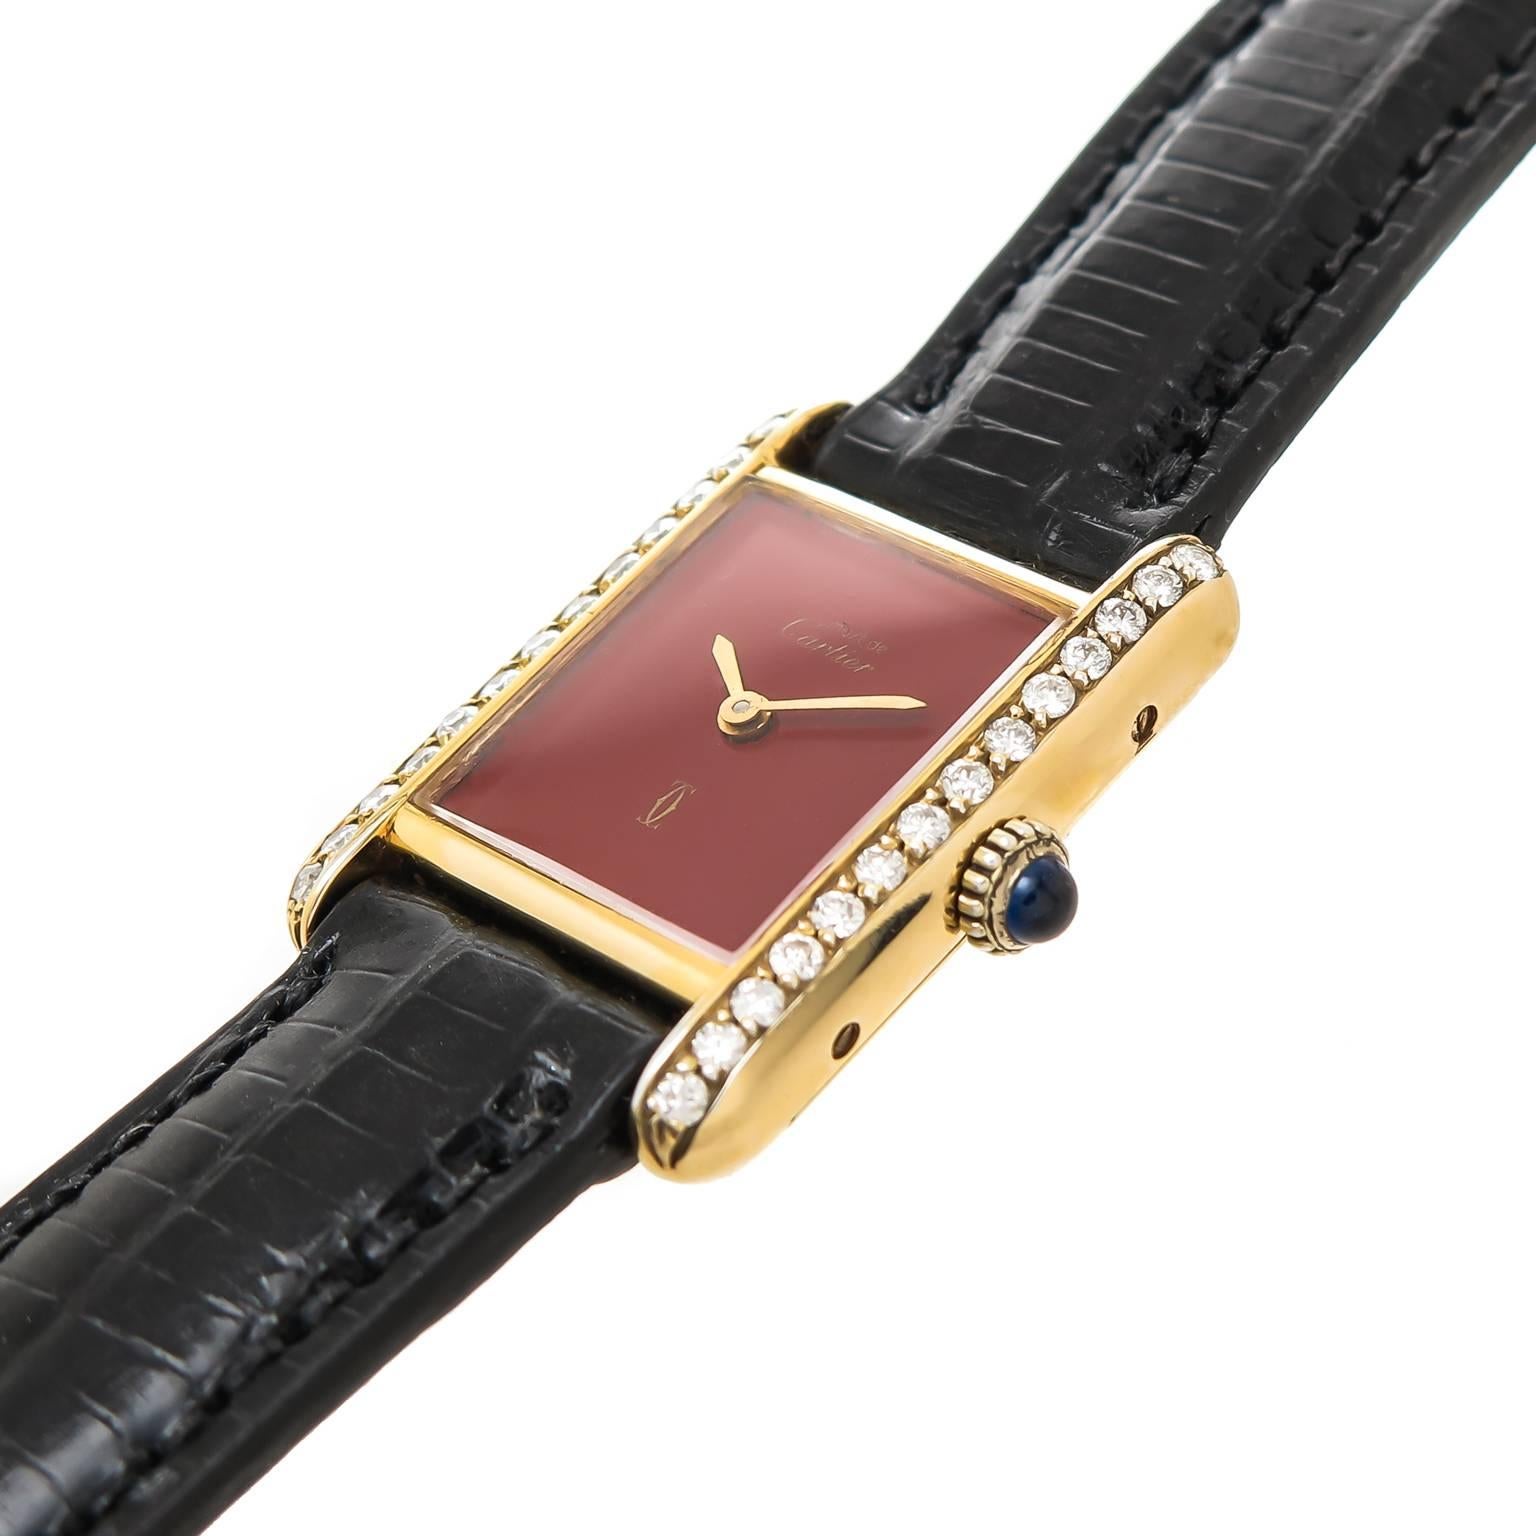 Circa 2000 Cartier, Must De Cartier Classic Ladies Tank Wrist Watch, 28 X 20 MM Vermeil ( Gold Plate Sterling Silver ) water resistant case with Round Brilliant cut Diamond set Bezel totaling .75 Carat. Quartz Movement, Red Dial with Gold Hands. New